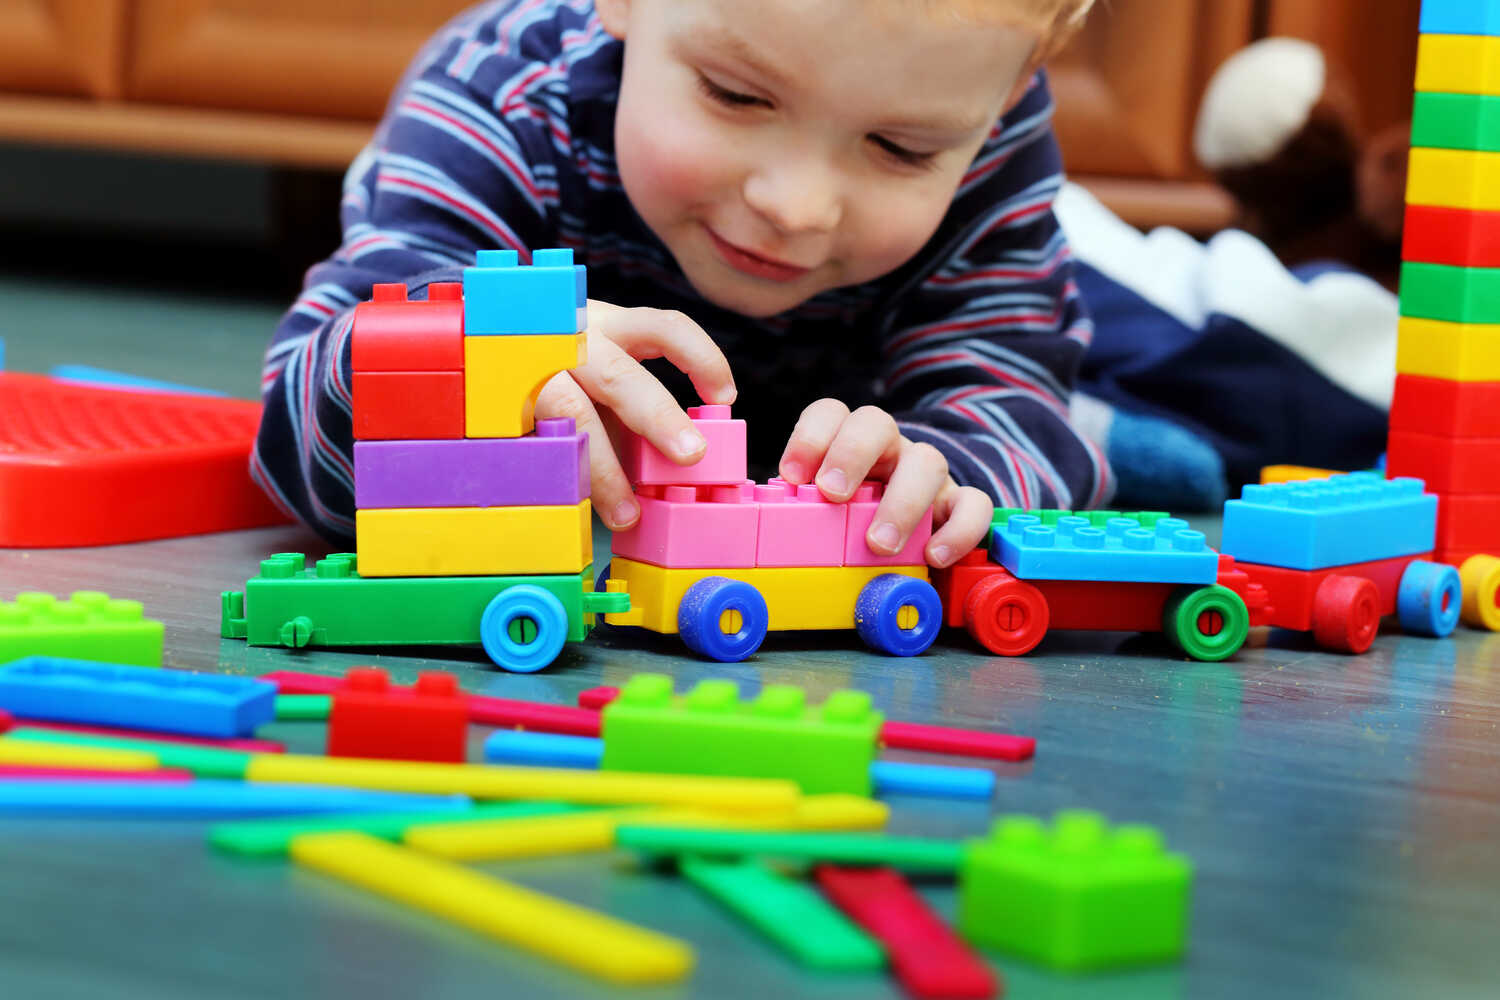 A toddler boy playing with building blocks